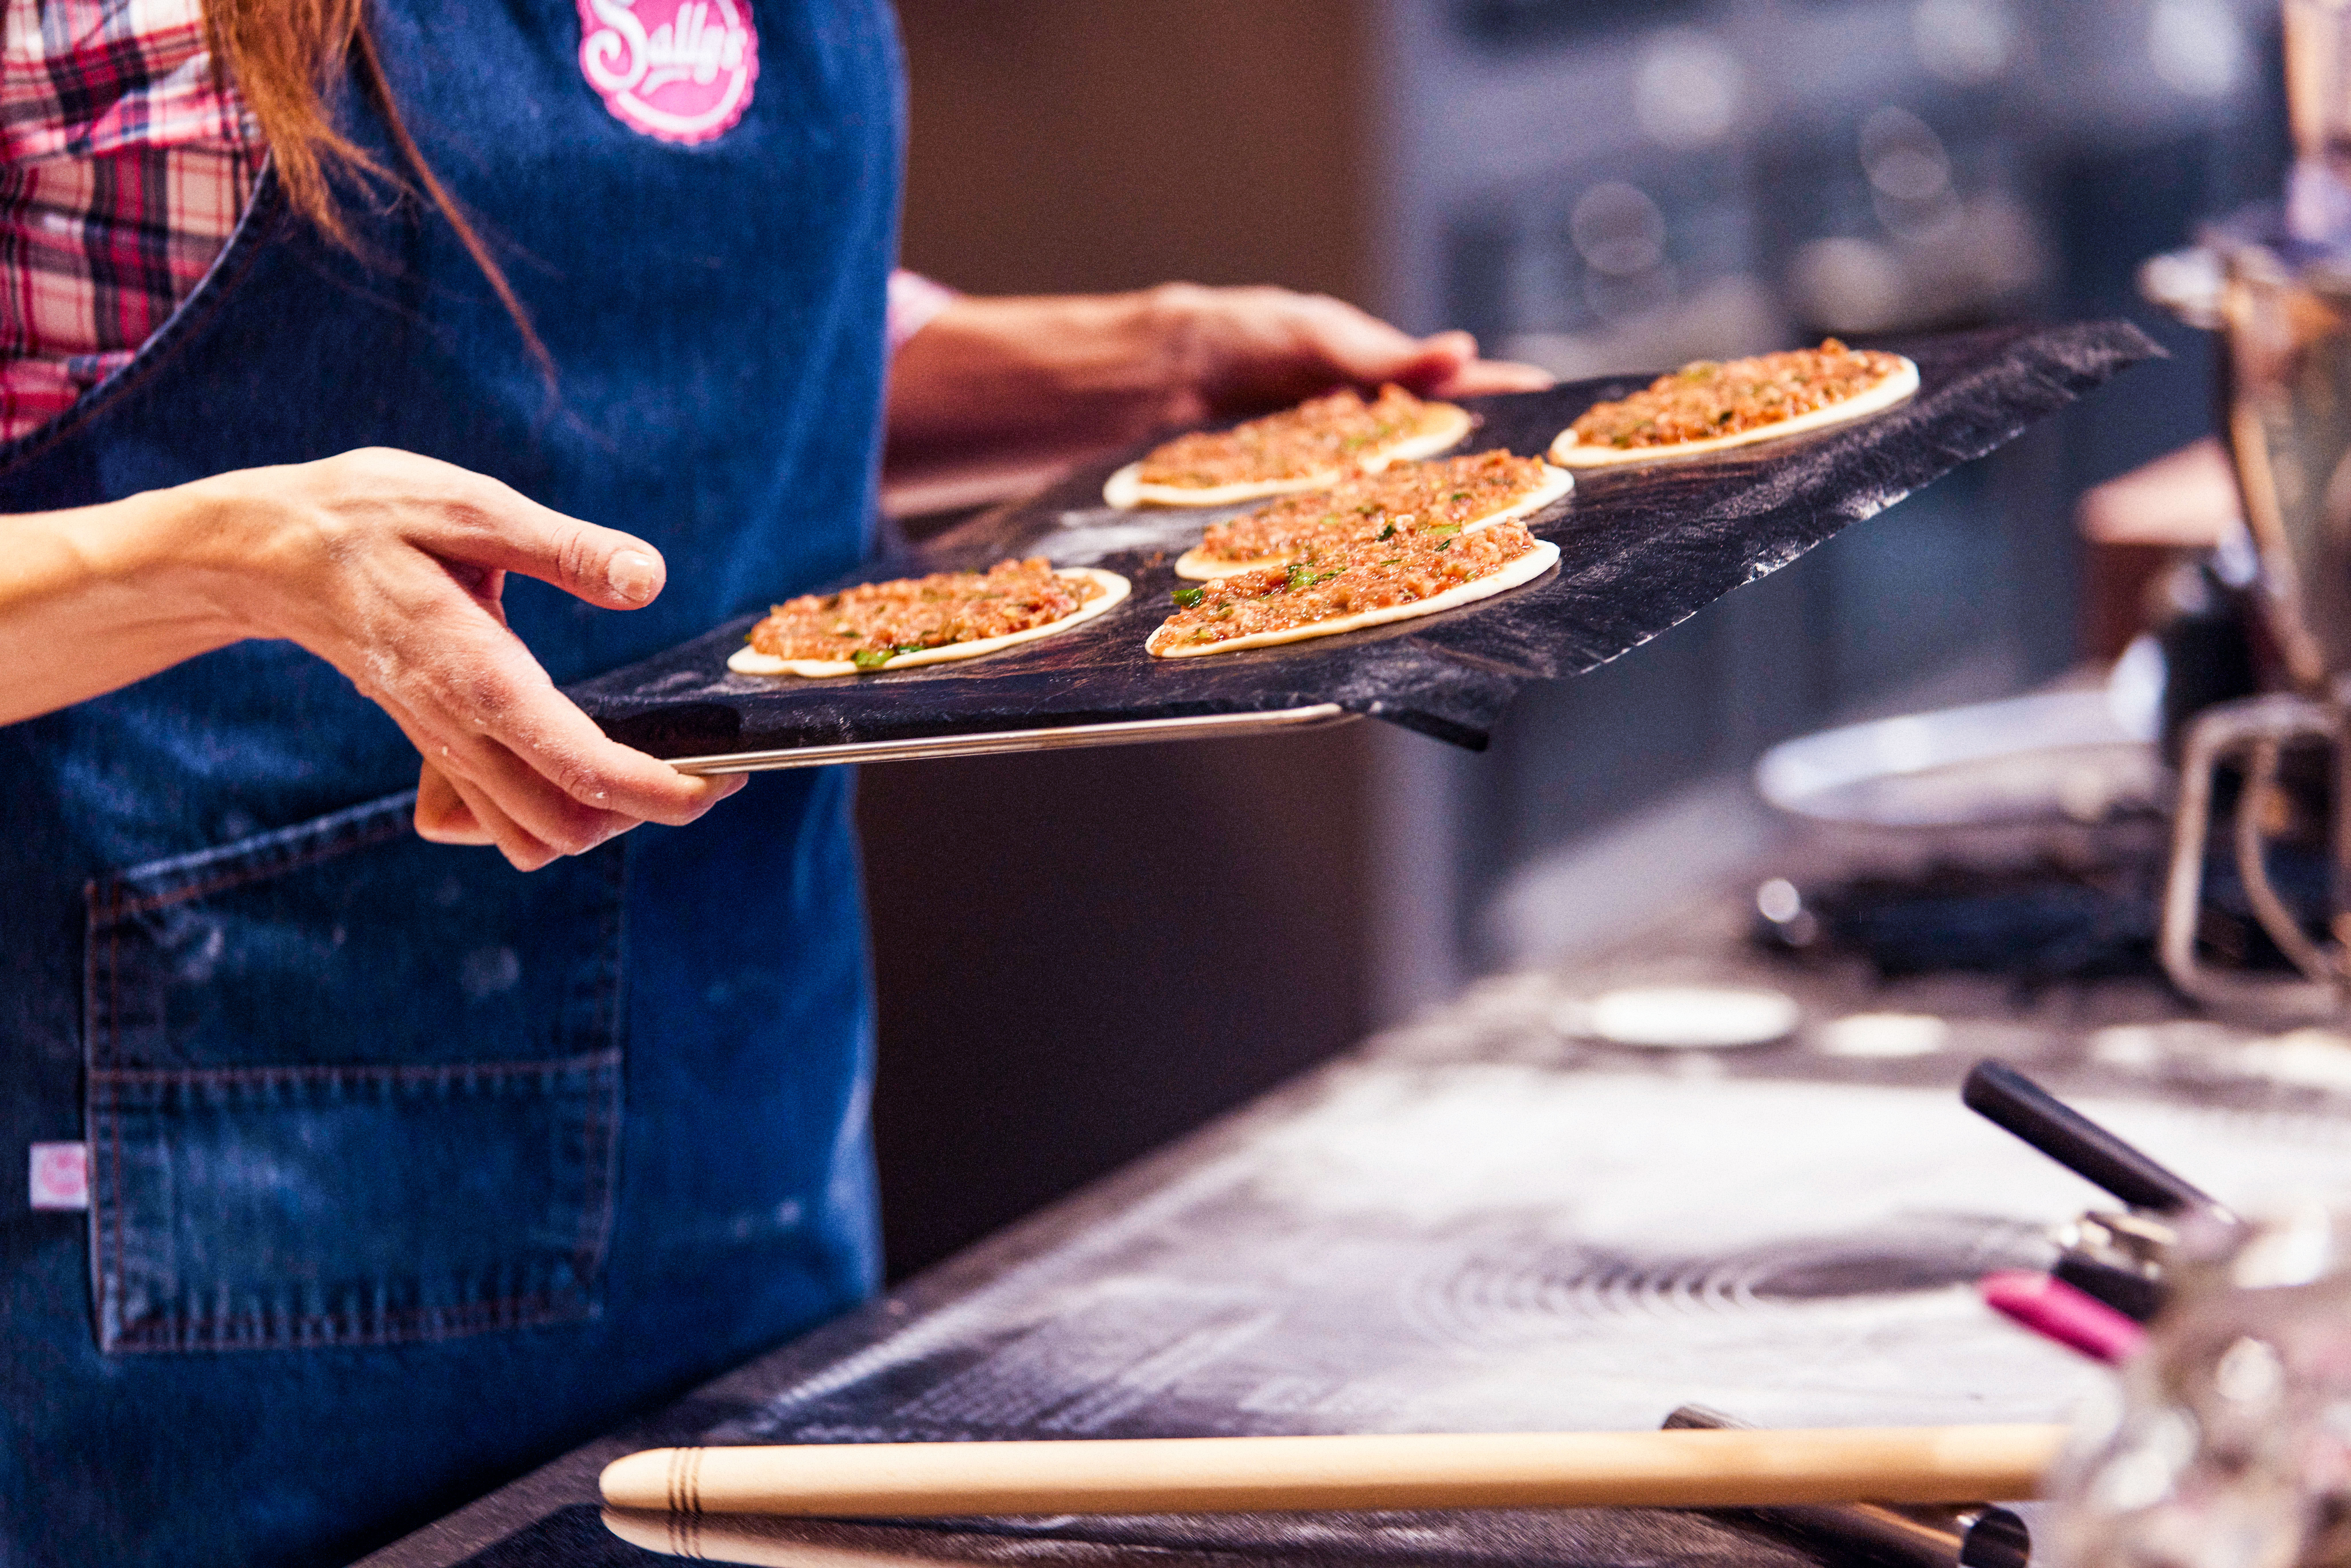 We‘re going oriental today: Lahmacun is a Turkish speciality and a popular classic in the Sallys Welt kitchen. Her recipe combines a moist dough with delicious spiced mince and healthy vegetables. It tastes delicious, and is really easy to prepare in your own kitchen.